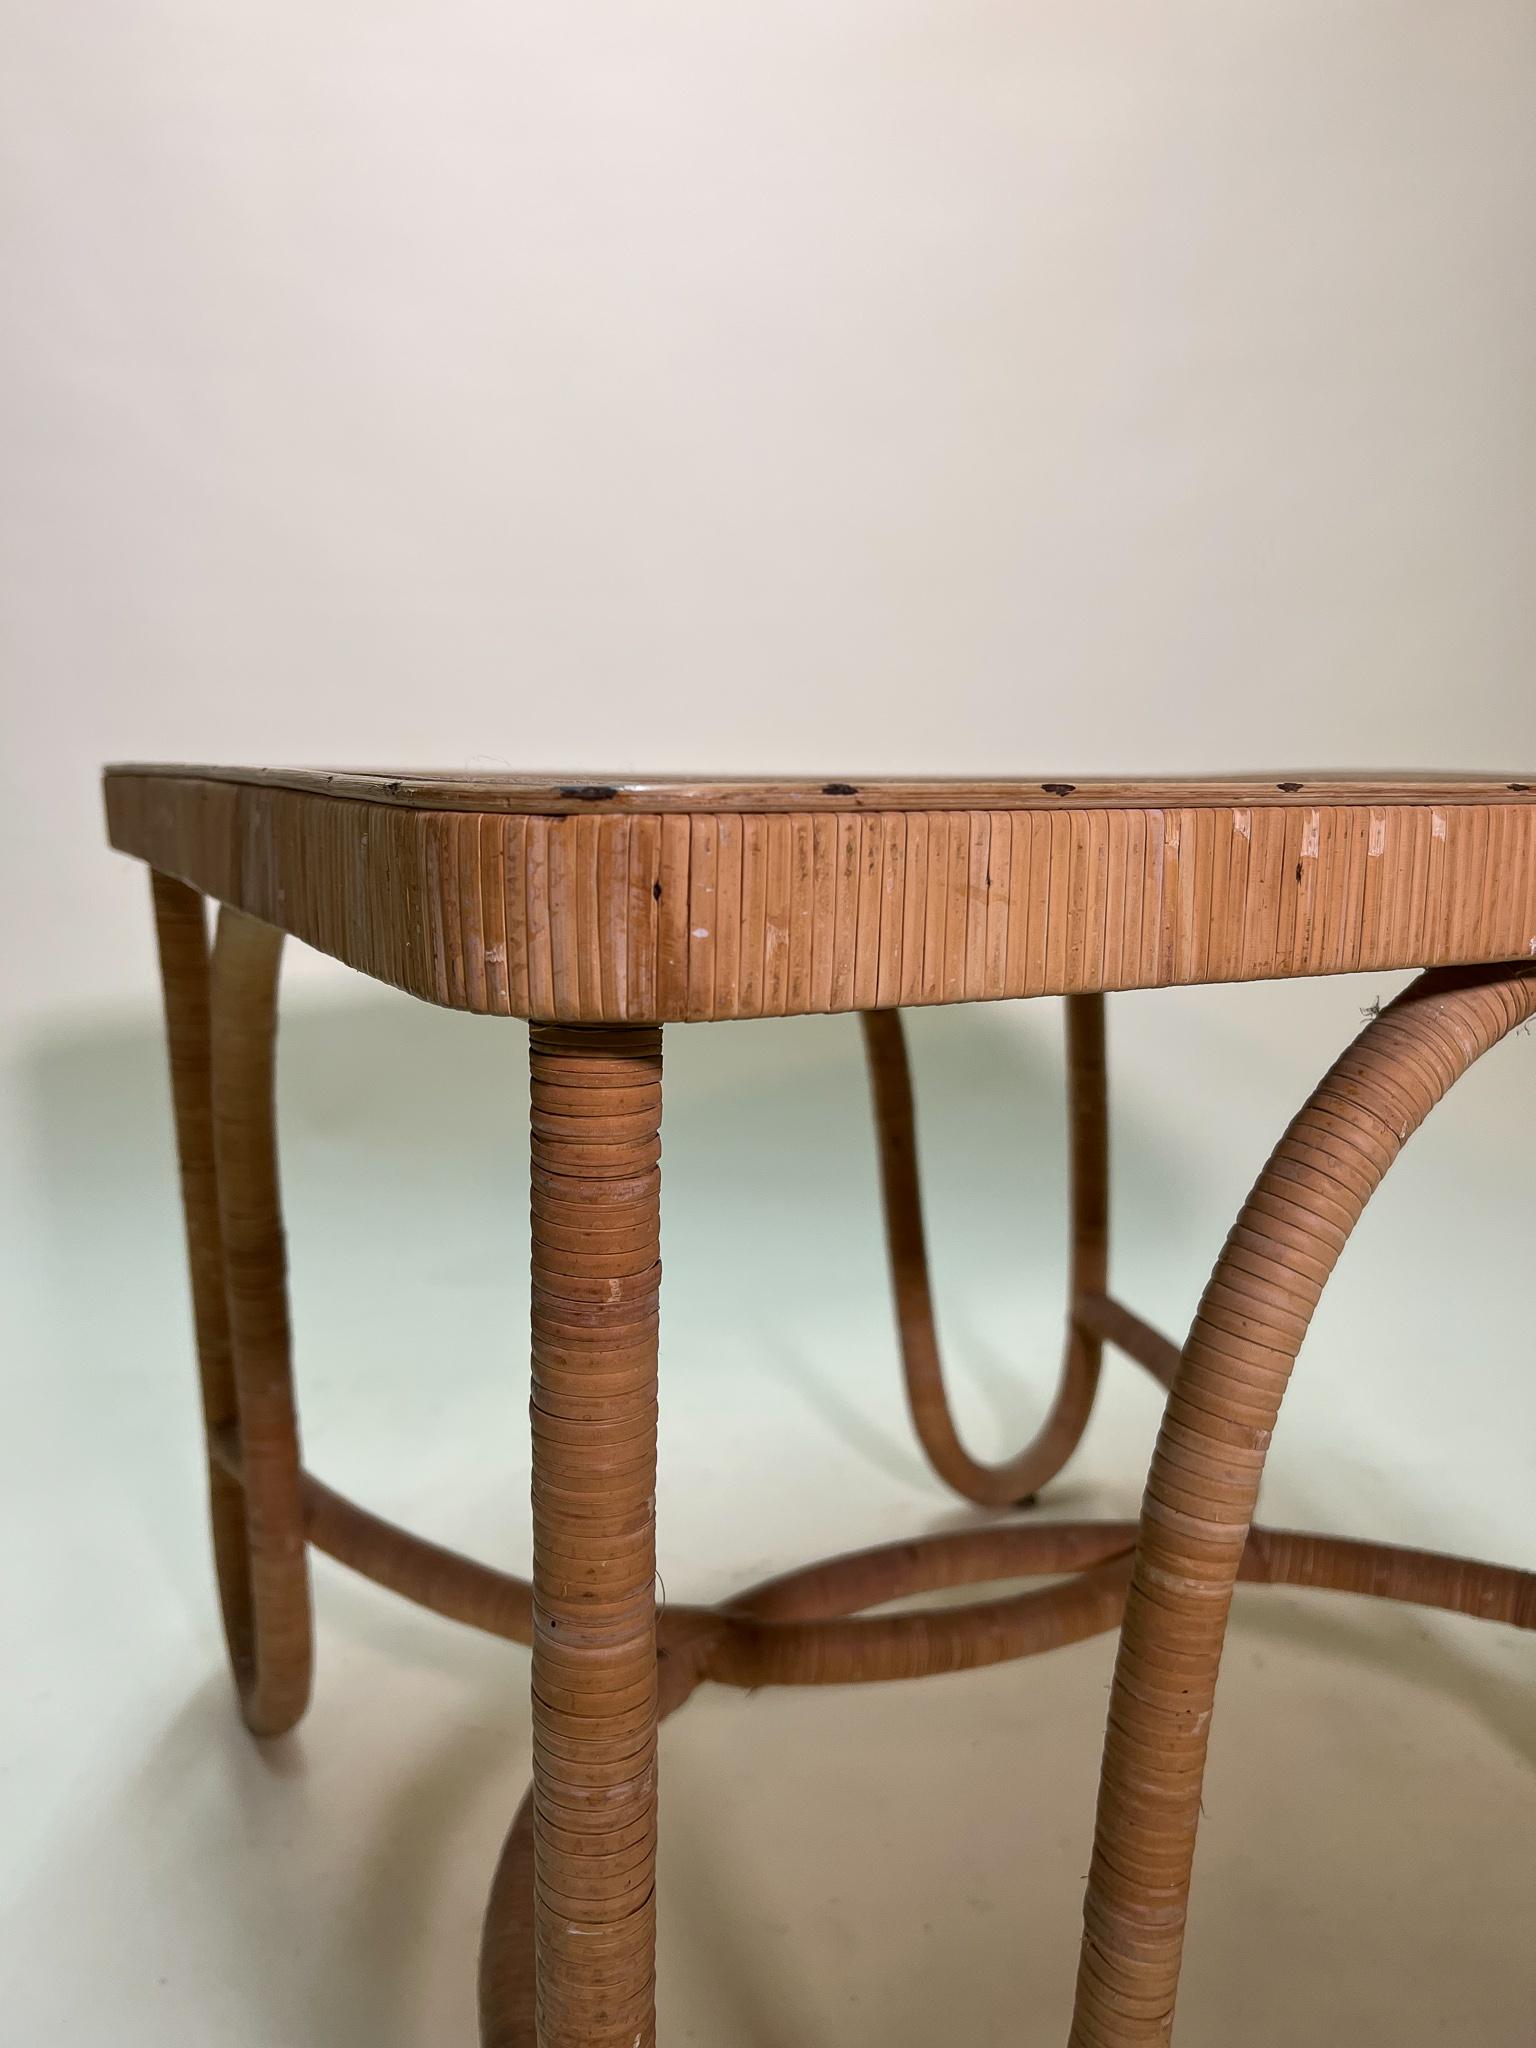 Rattan & Wicker Table In Good Condition For Sale In New York, NY